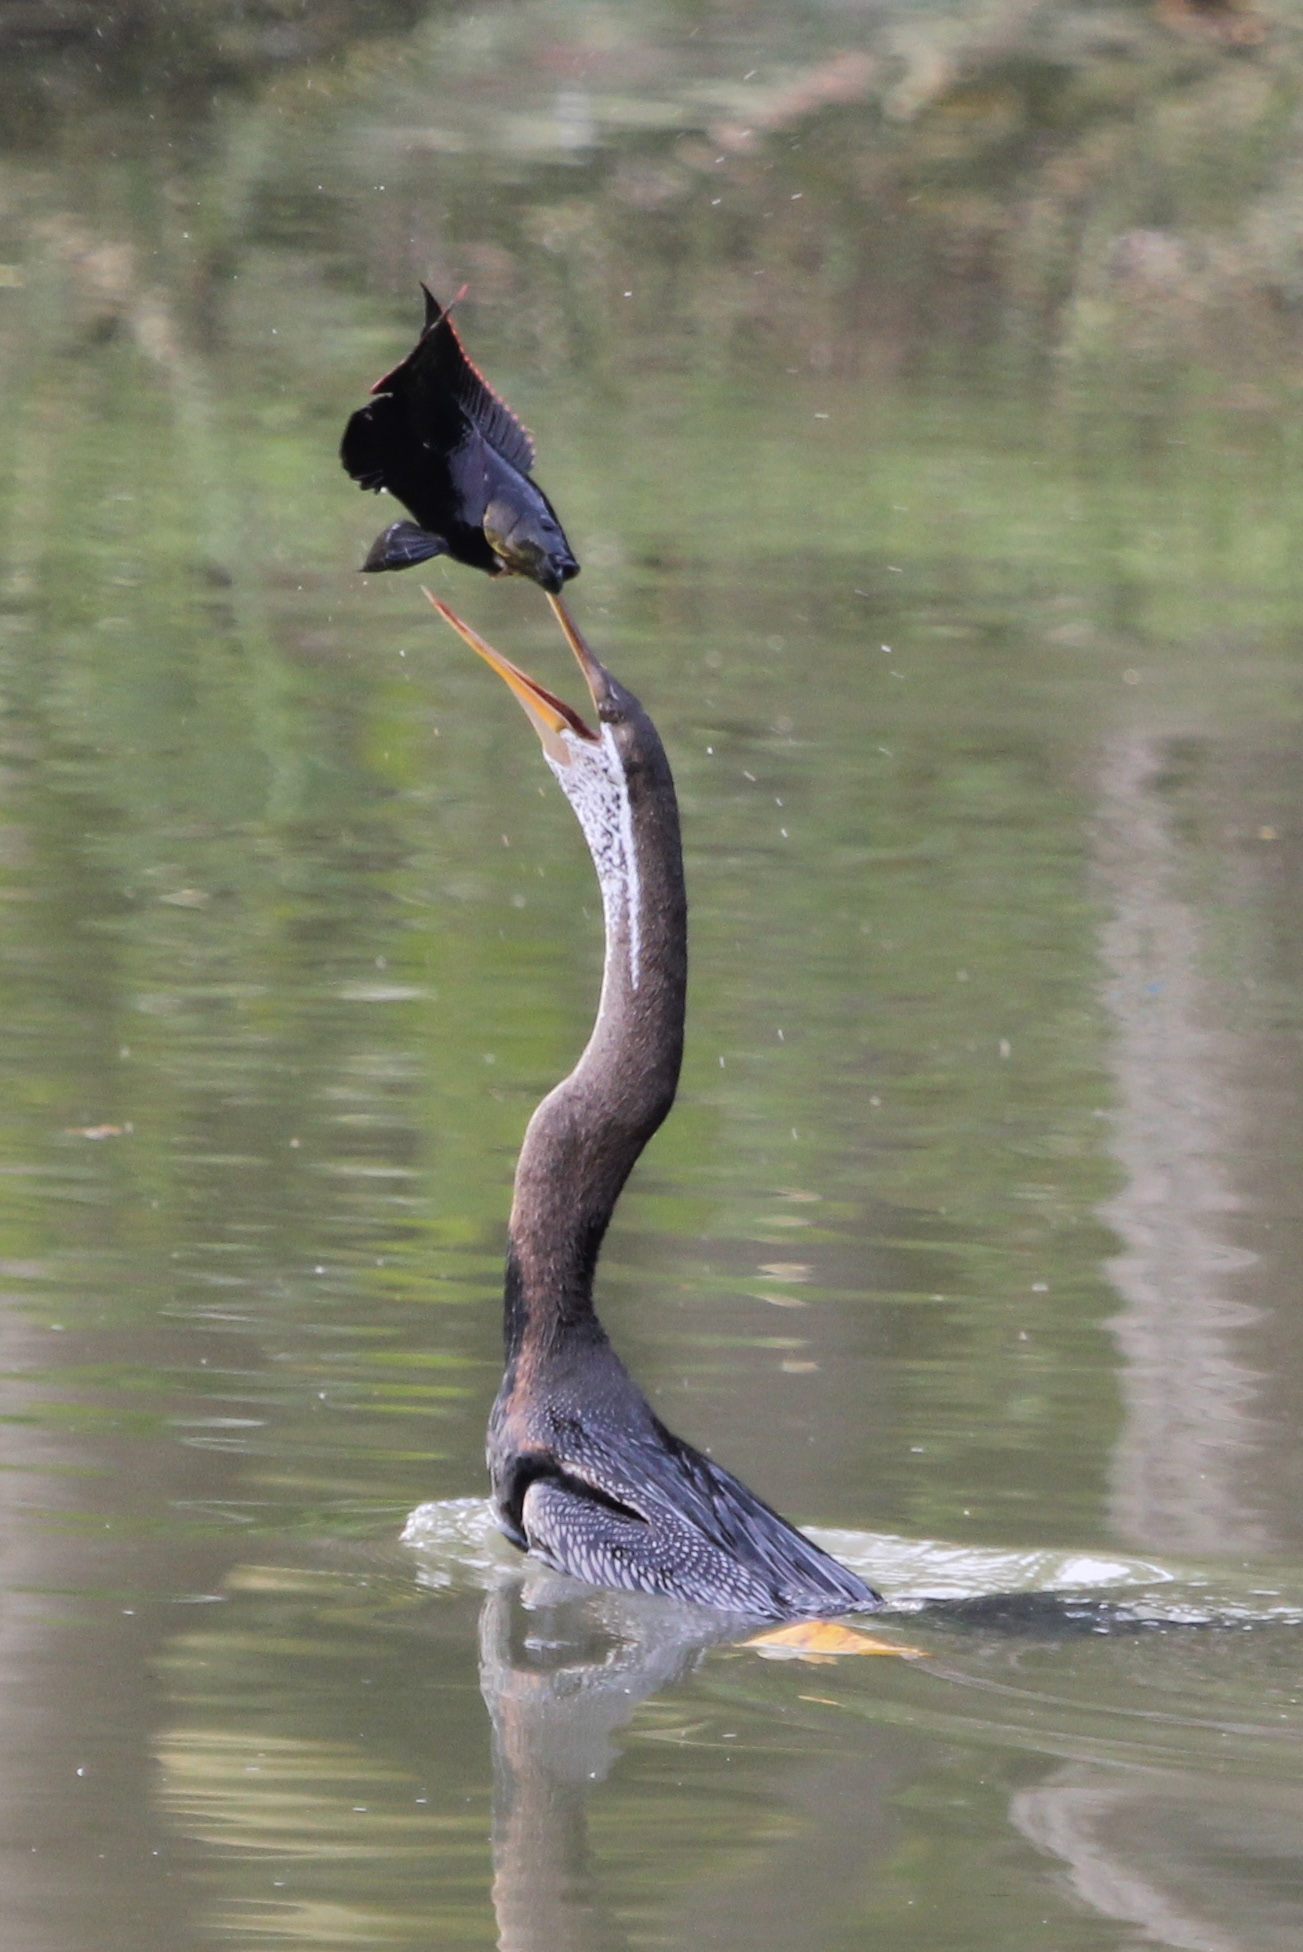 Indian Darter tossing a fish into its mouth